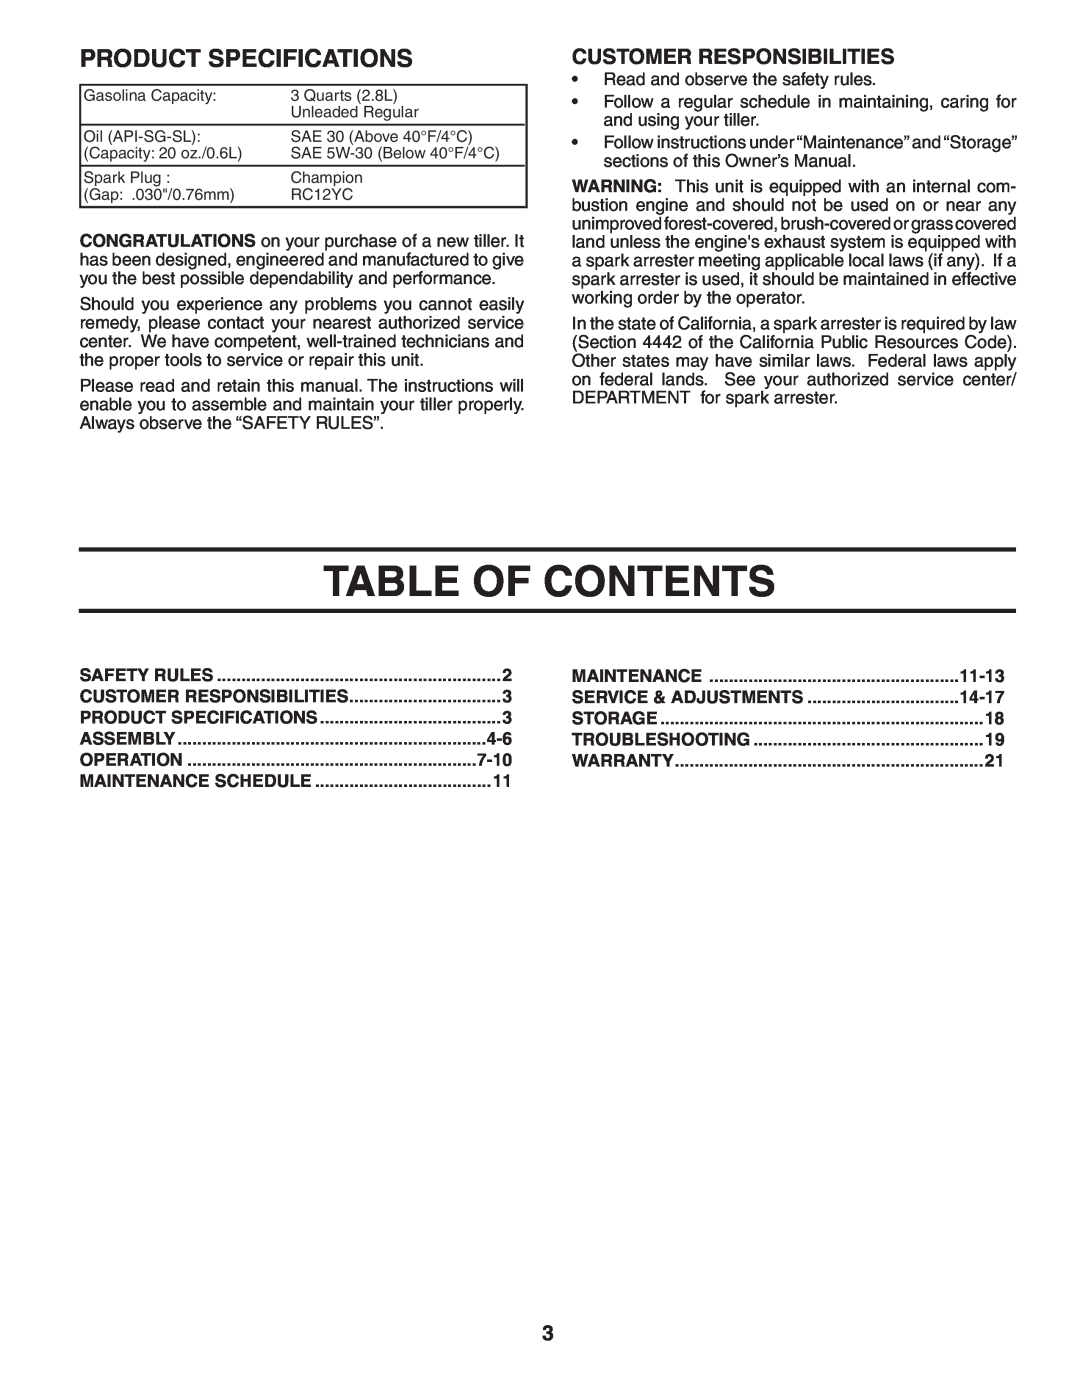 Poulan PRRT50 manual Table Of Contents, Product Specifications, Customer Responsibilities, 11-13, 14-17, 7-10 